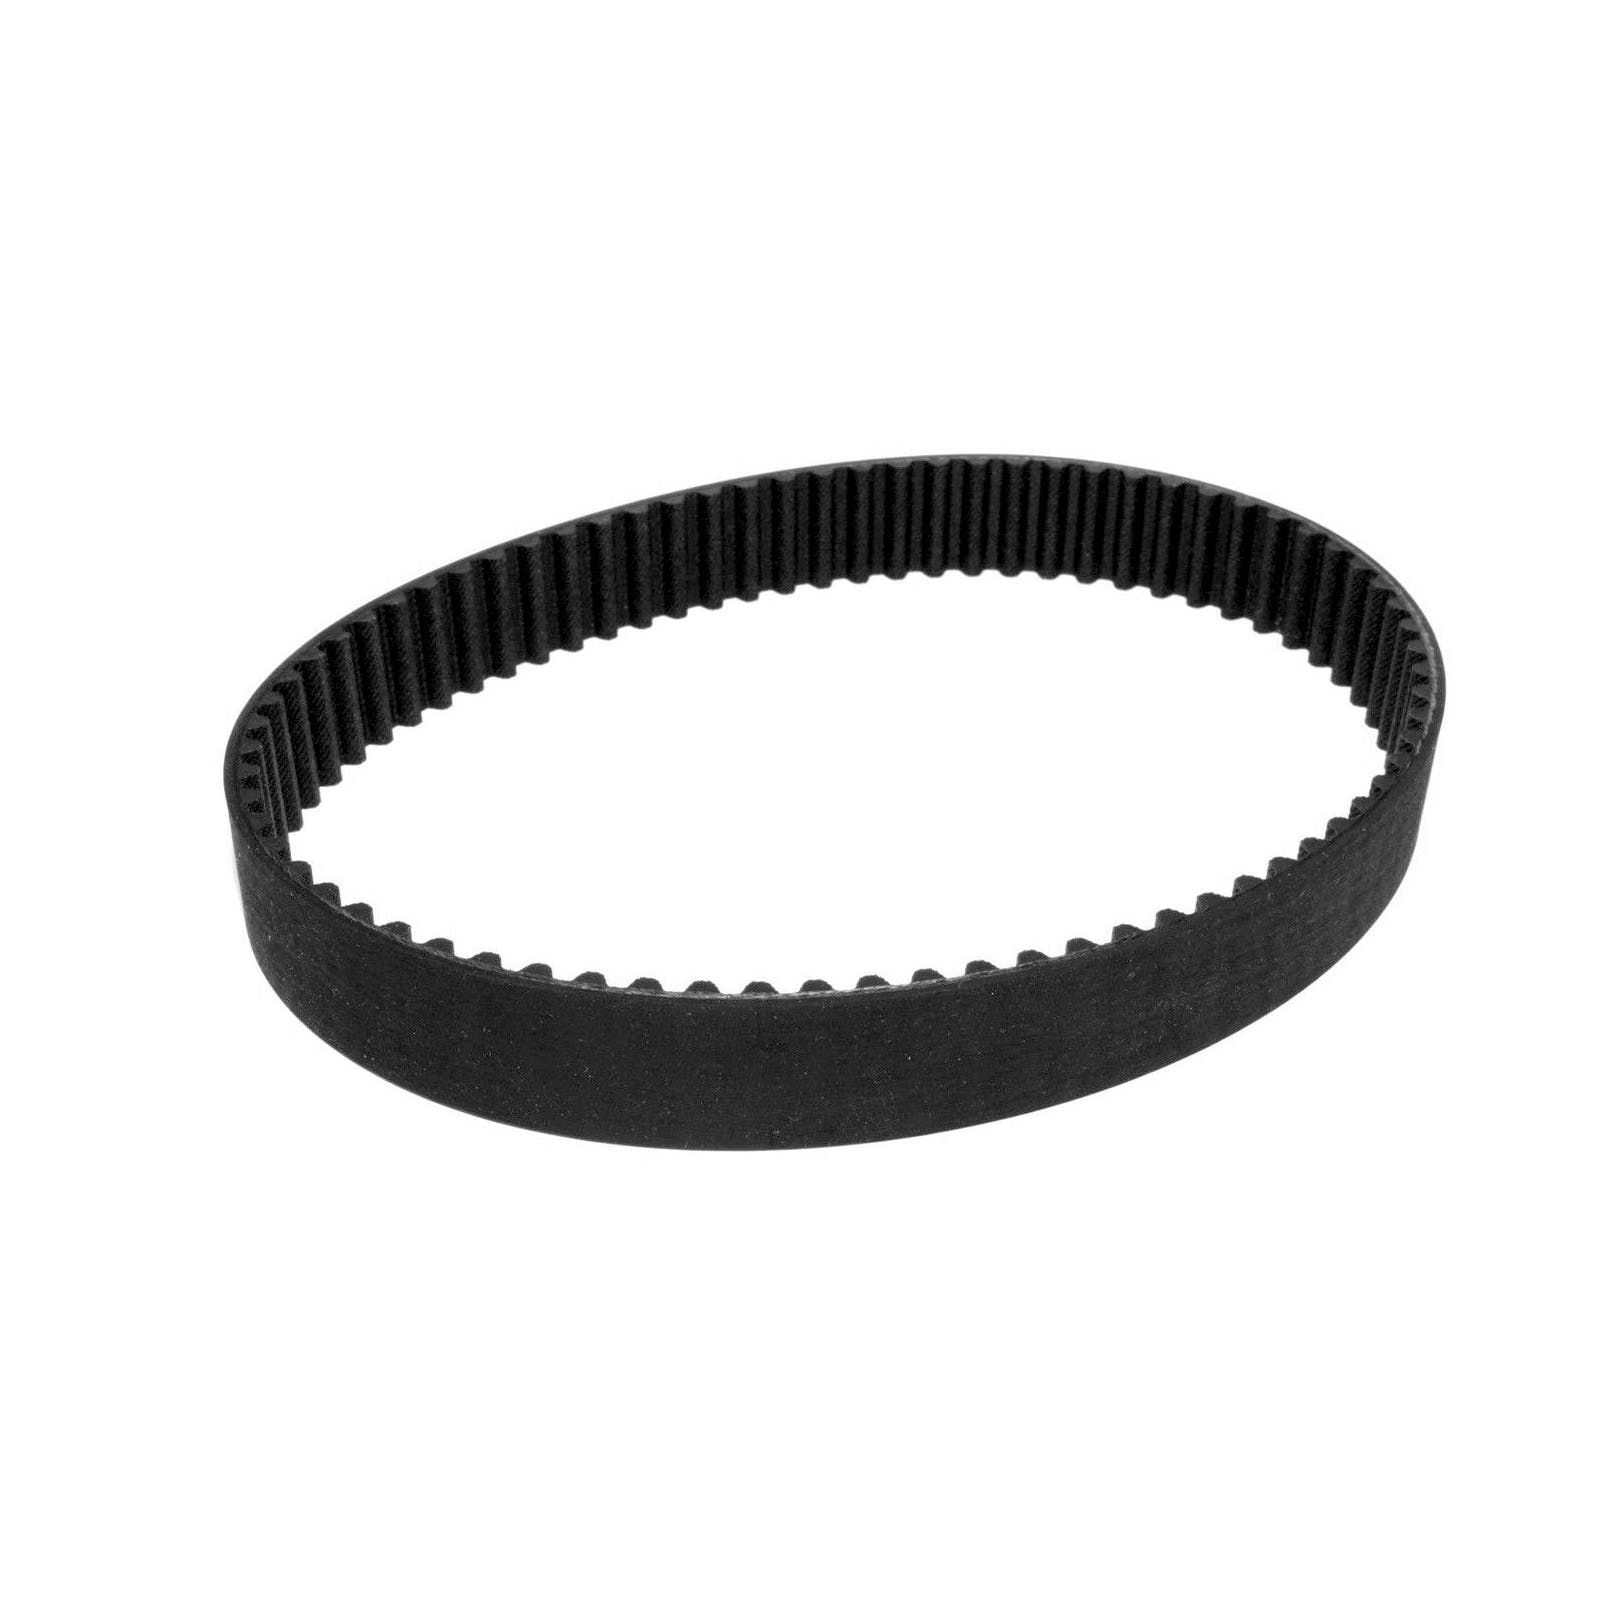 Speedmaster PCE629.1001 74-Tooth 25.5 mm X 590.5mm Timing Belt Drive Replacement Belt